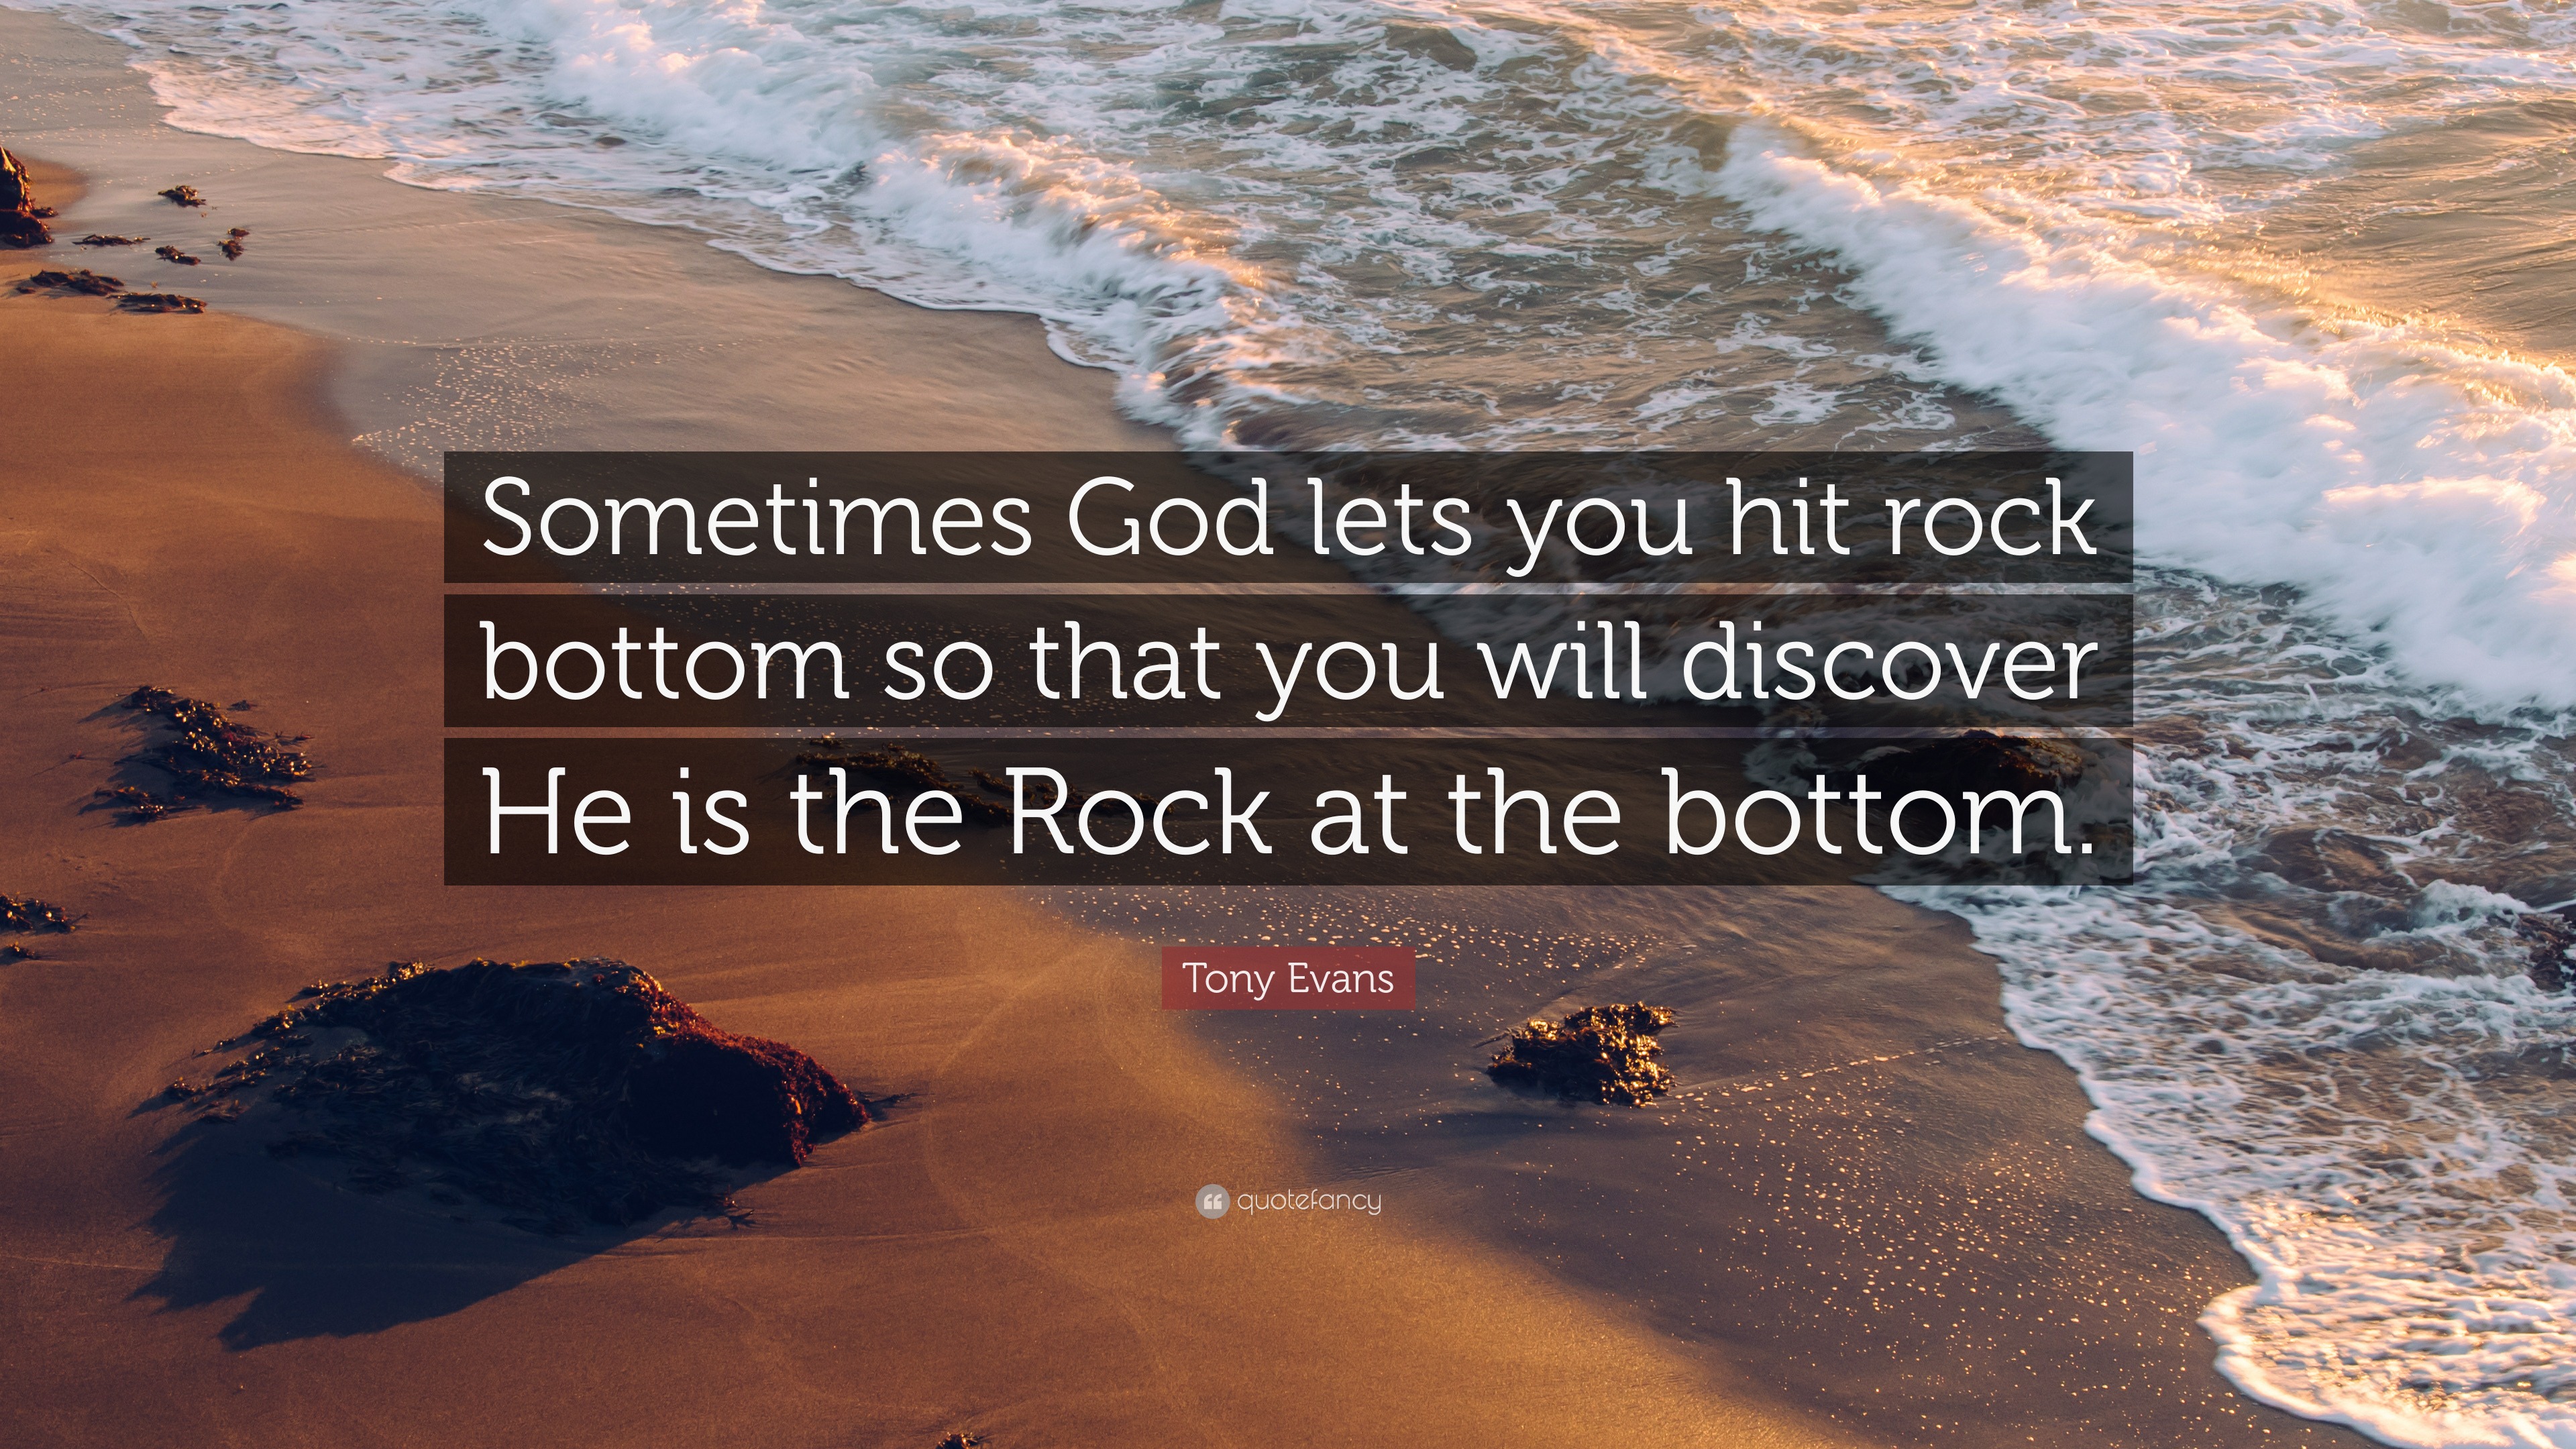 Tony Evans Quote: “Sometimes God lets you hit rock bottom so that you